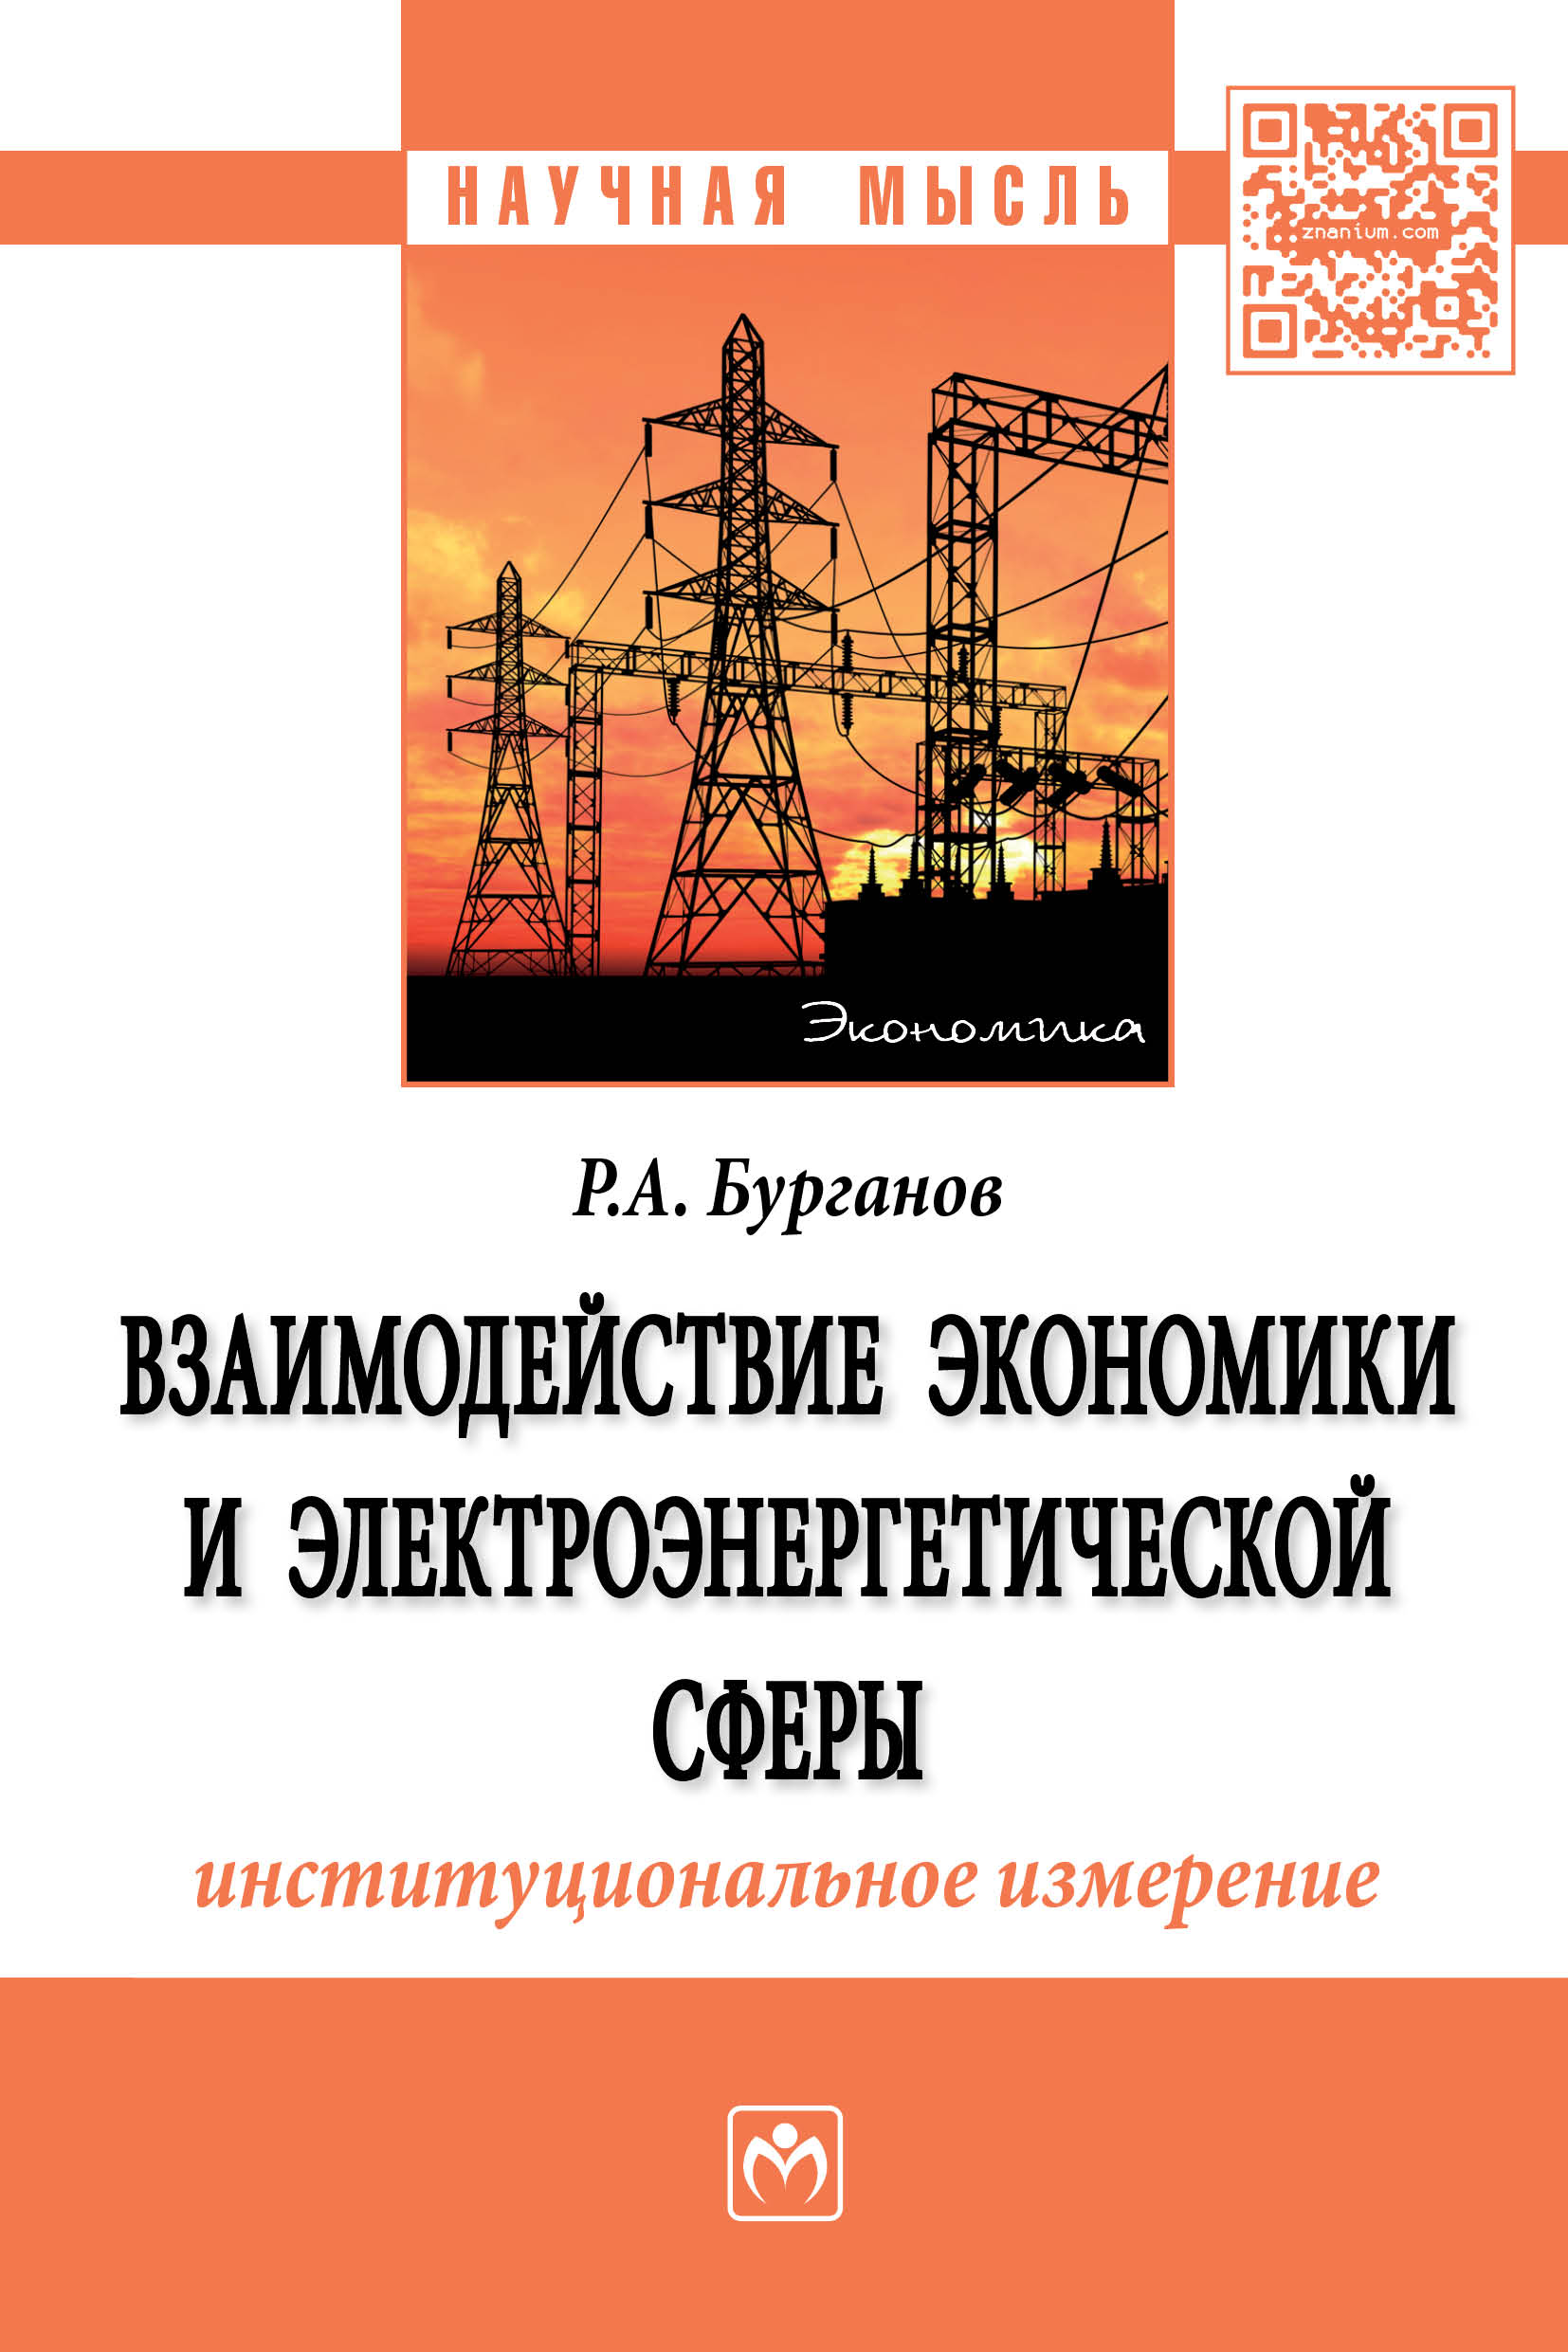                         The interaction of the economy and the power industry: institutional dimension
            